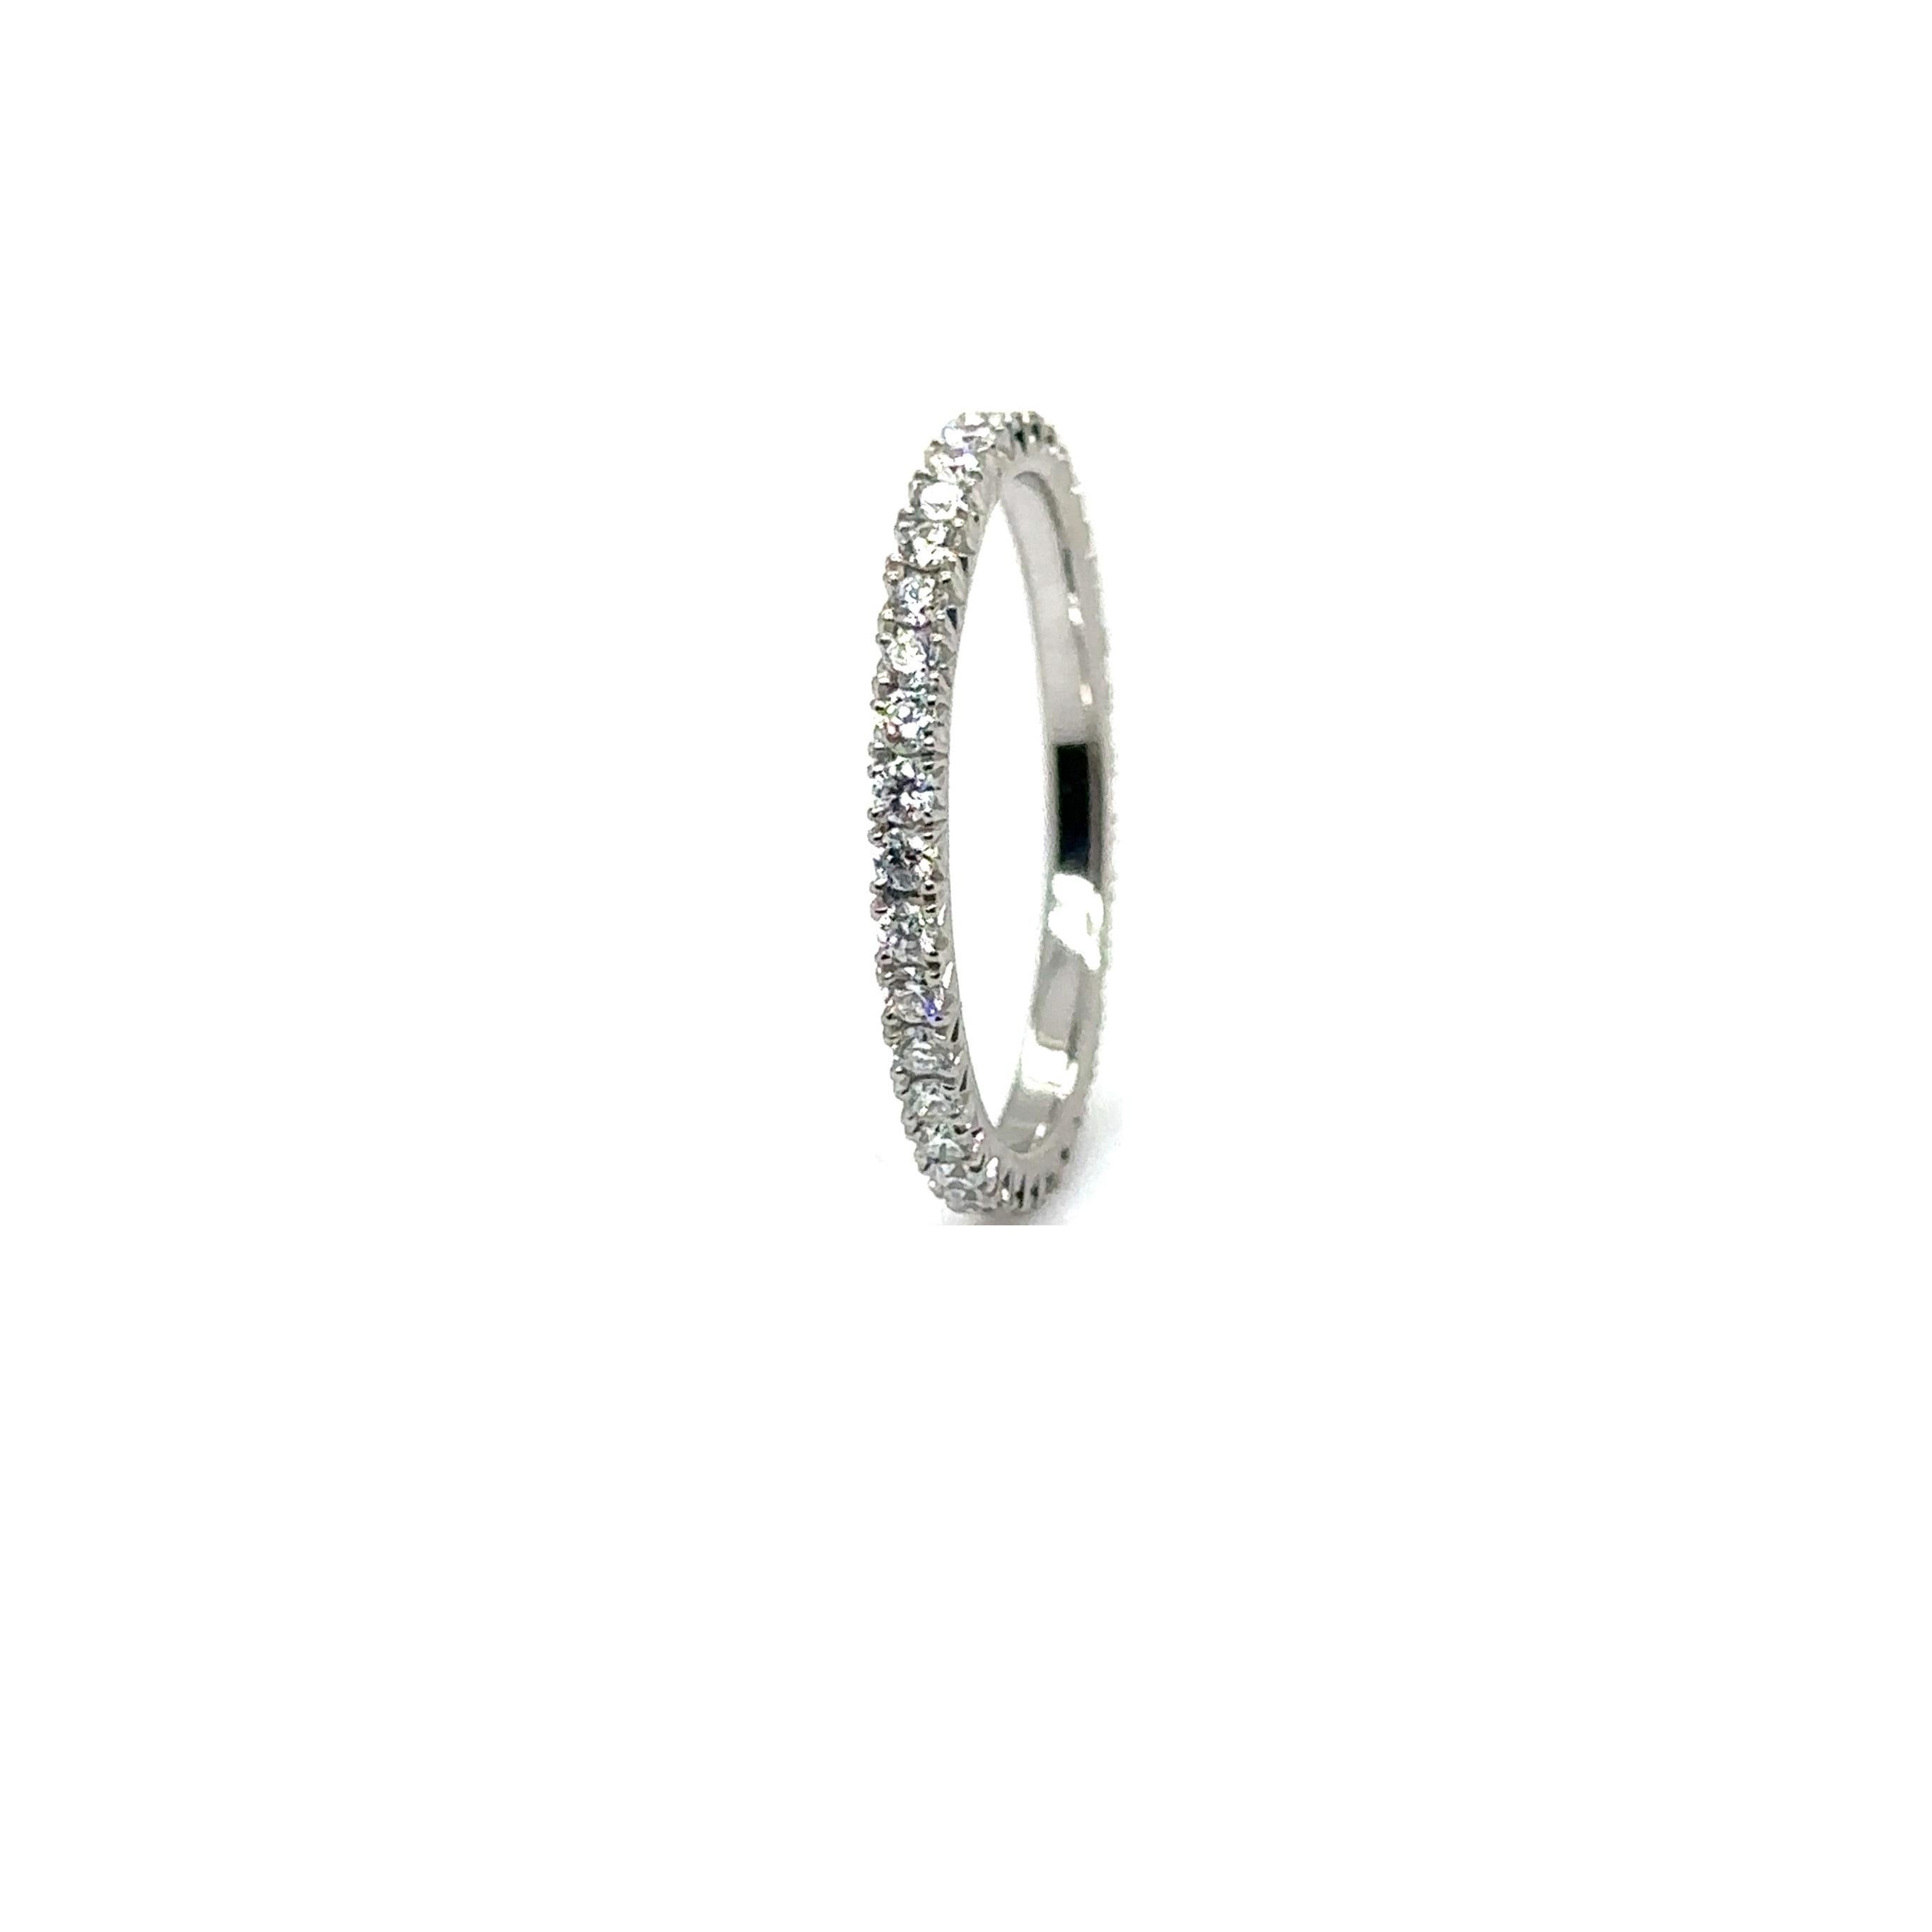 PLATINUM WEDDING BAND with 0.56 CWT DIAMONDS
Metal: Platinum
Diamond Info: 
33 - G/VS ROUND BRILLIANT DIAMONDS
SETTING MICRO PAVE FISH TAIL 
Total Ct Weight: 0.56 cwt.
Item Weight: 2.11 gm
Ring Size: 6 ¼ (Can be sized up to 6 ½)
Measurements:  1.80